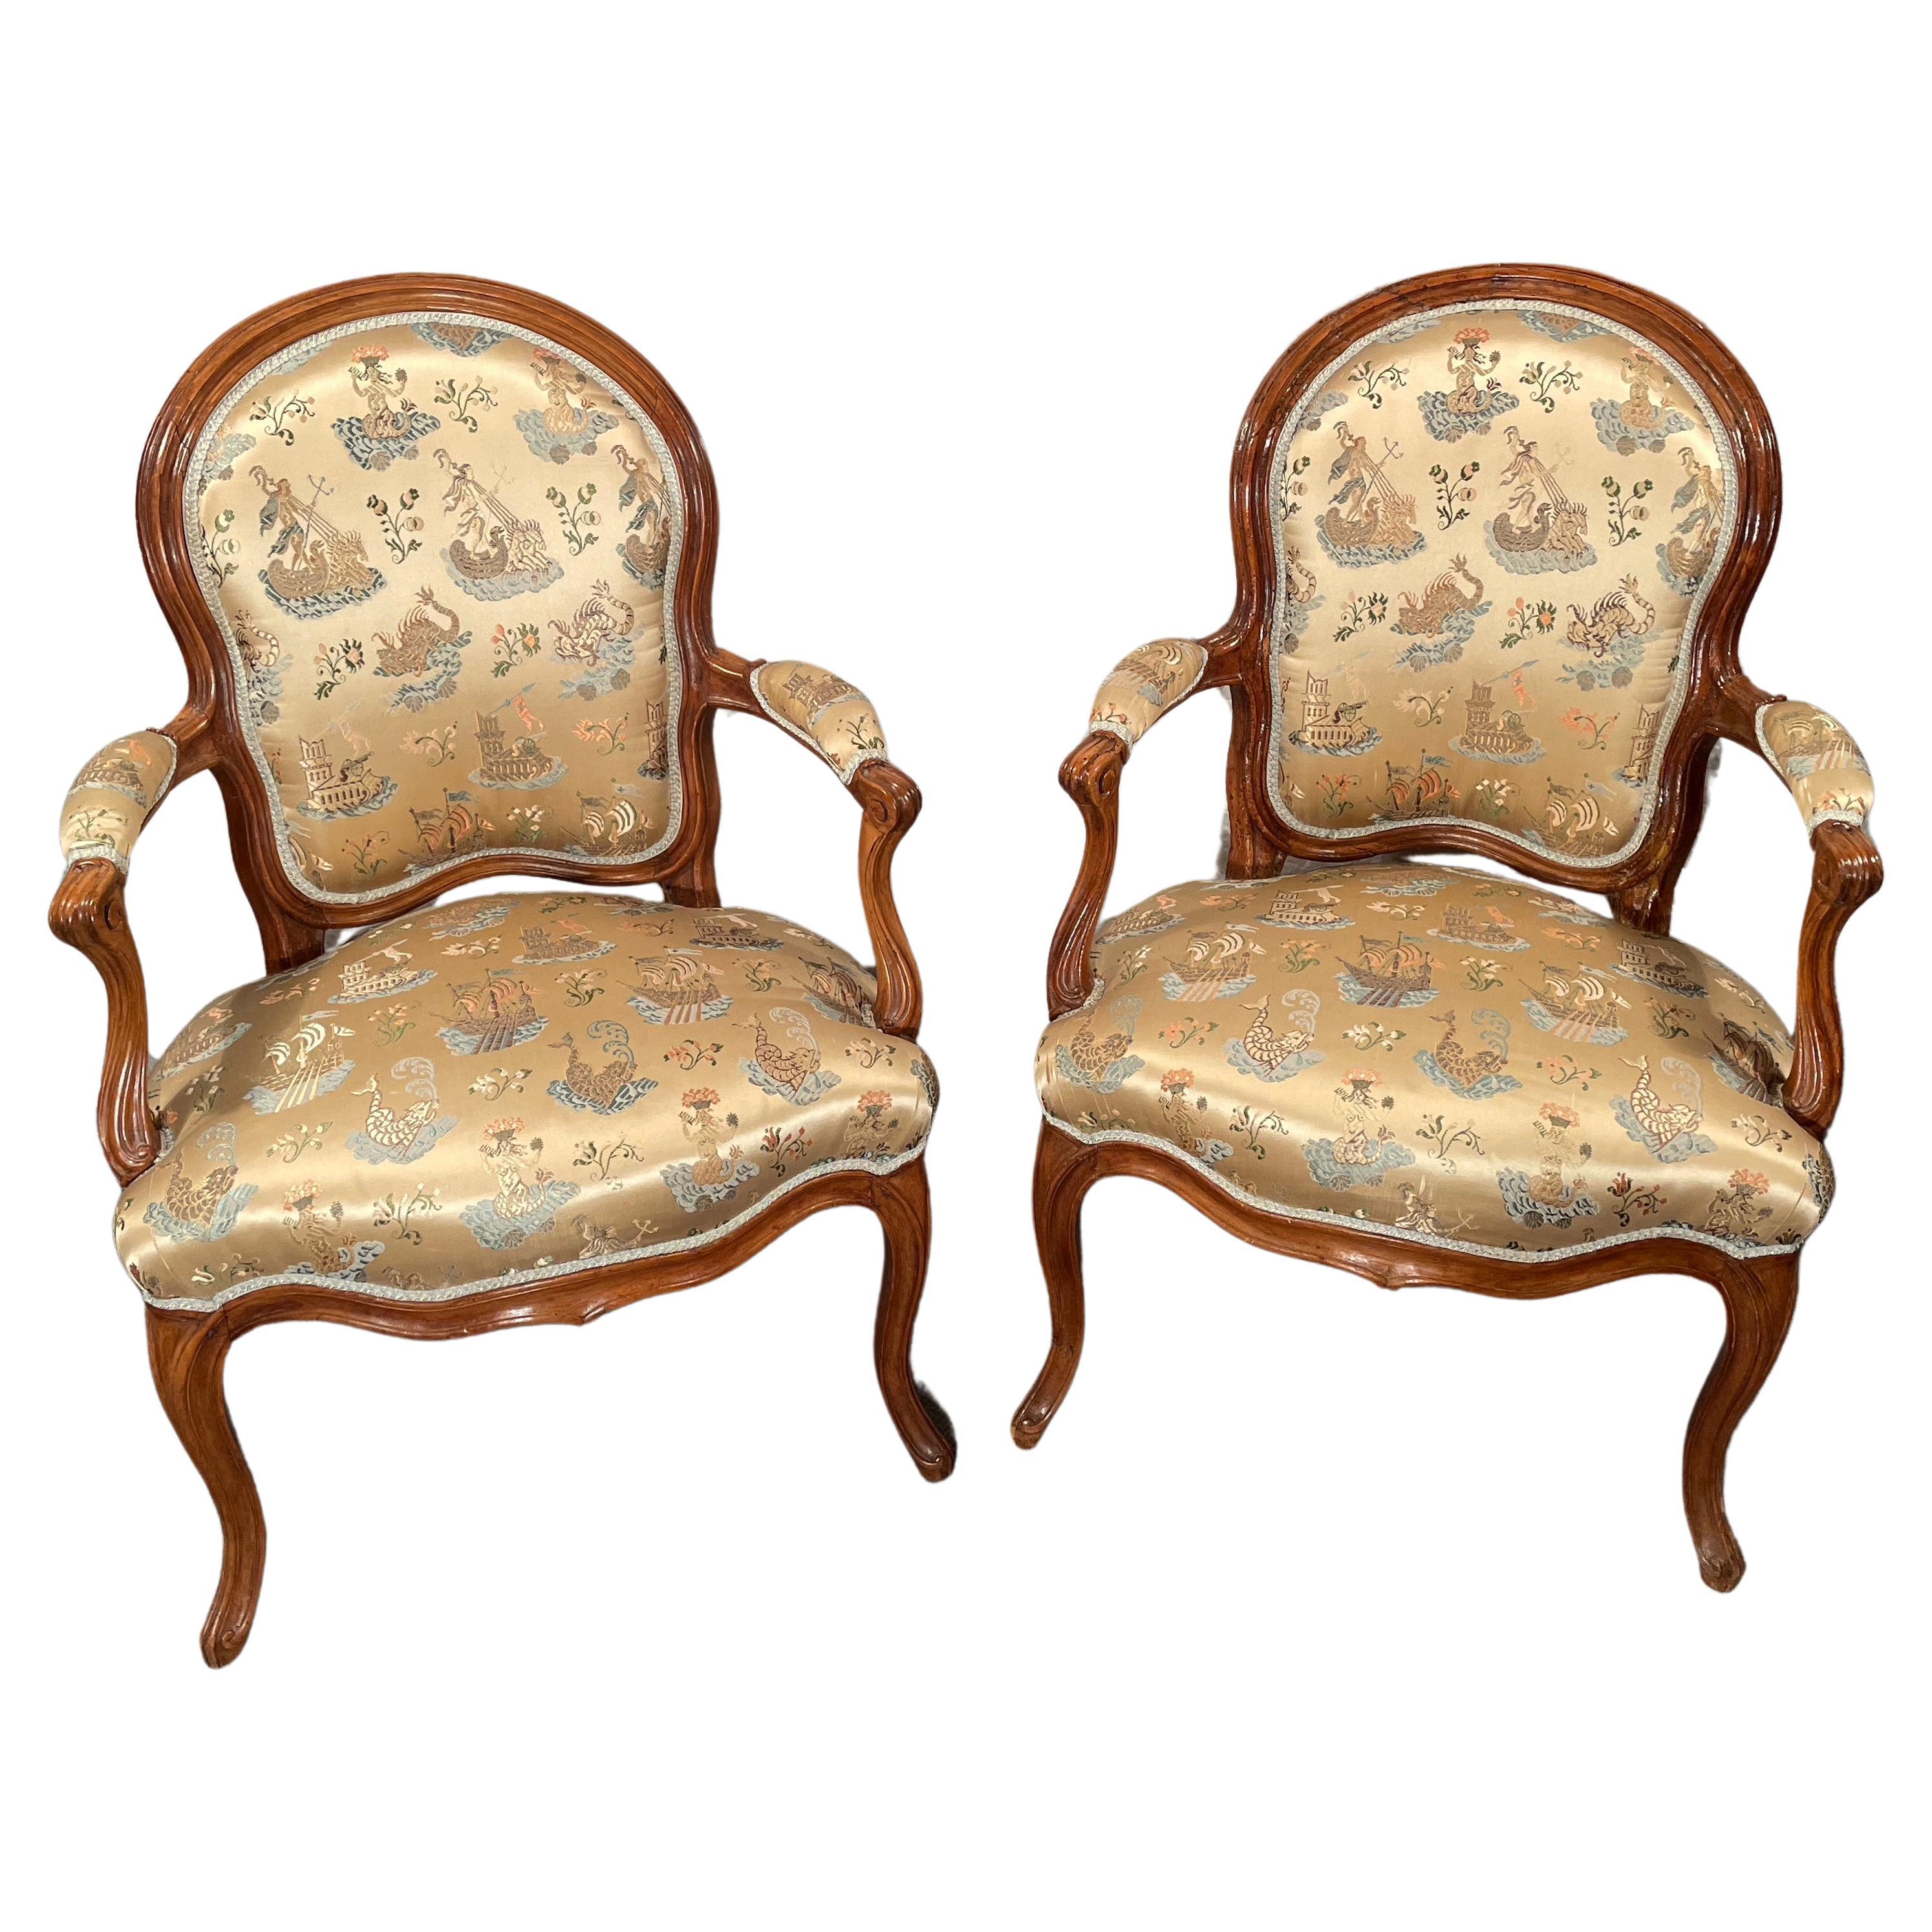 Pair of 18th century Louis XV Armchairs, France 1760 For Sale